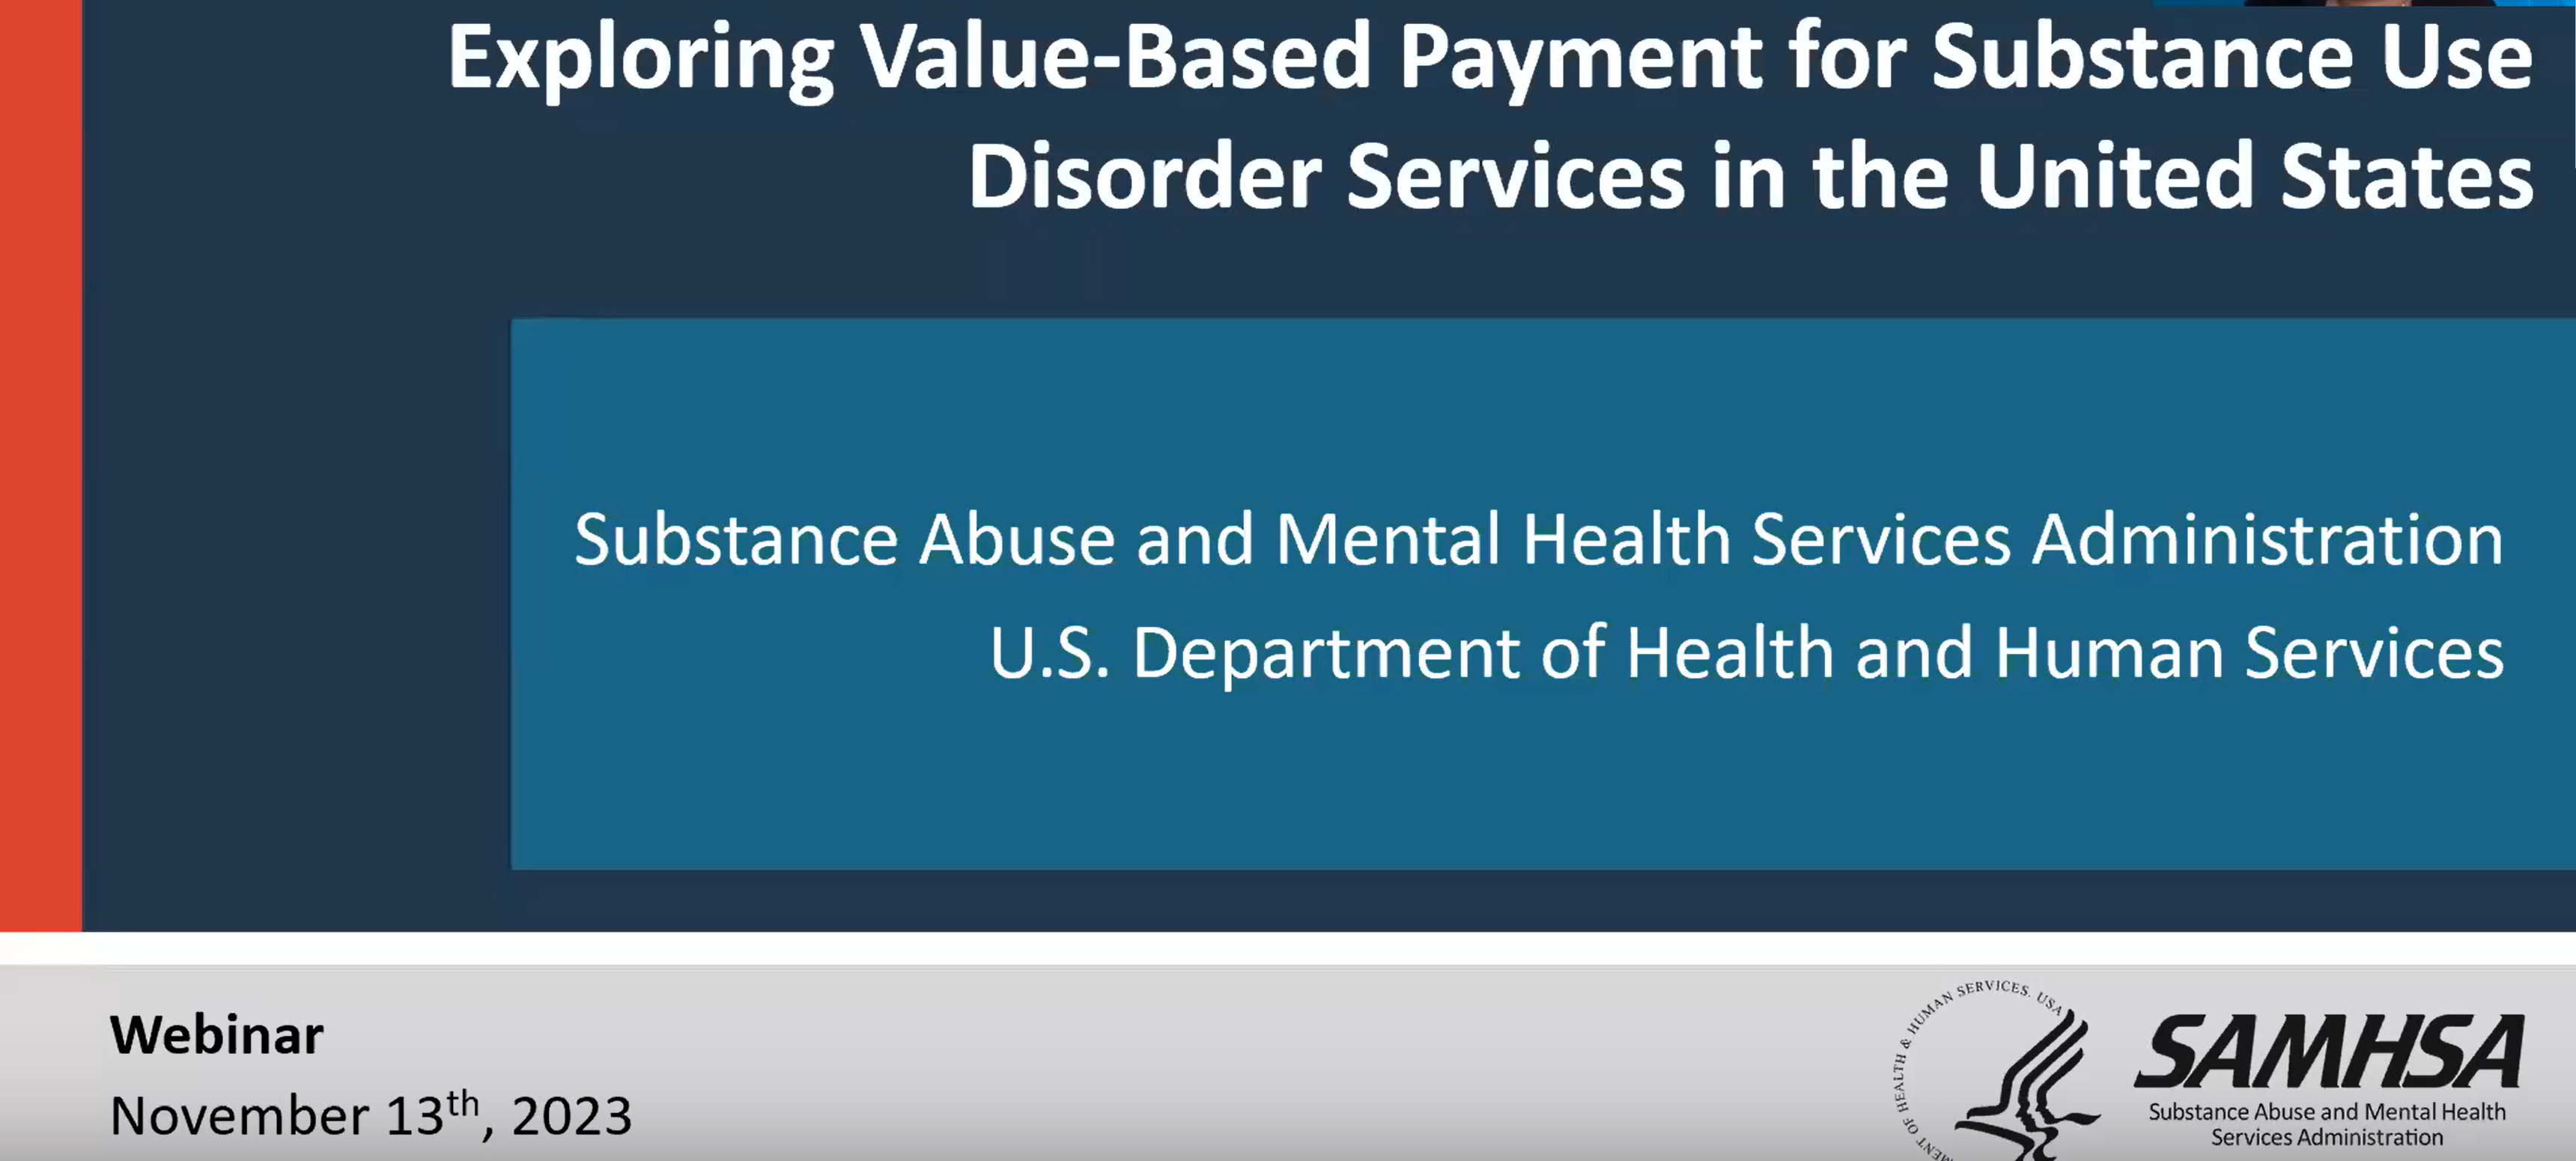 Value-Based Payment for Substance Use Disorder Services in the United States